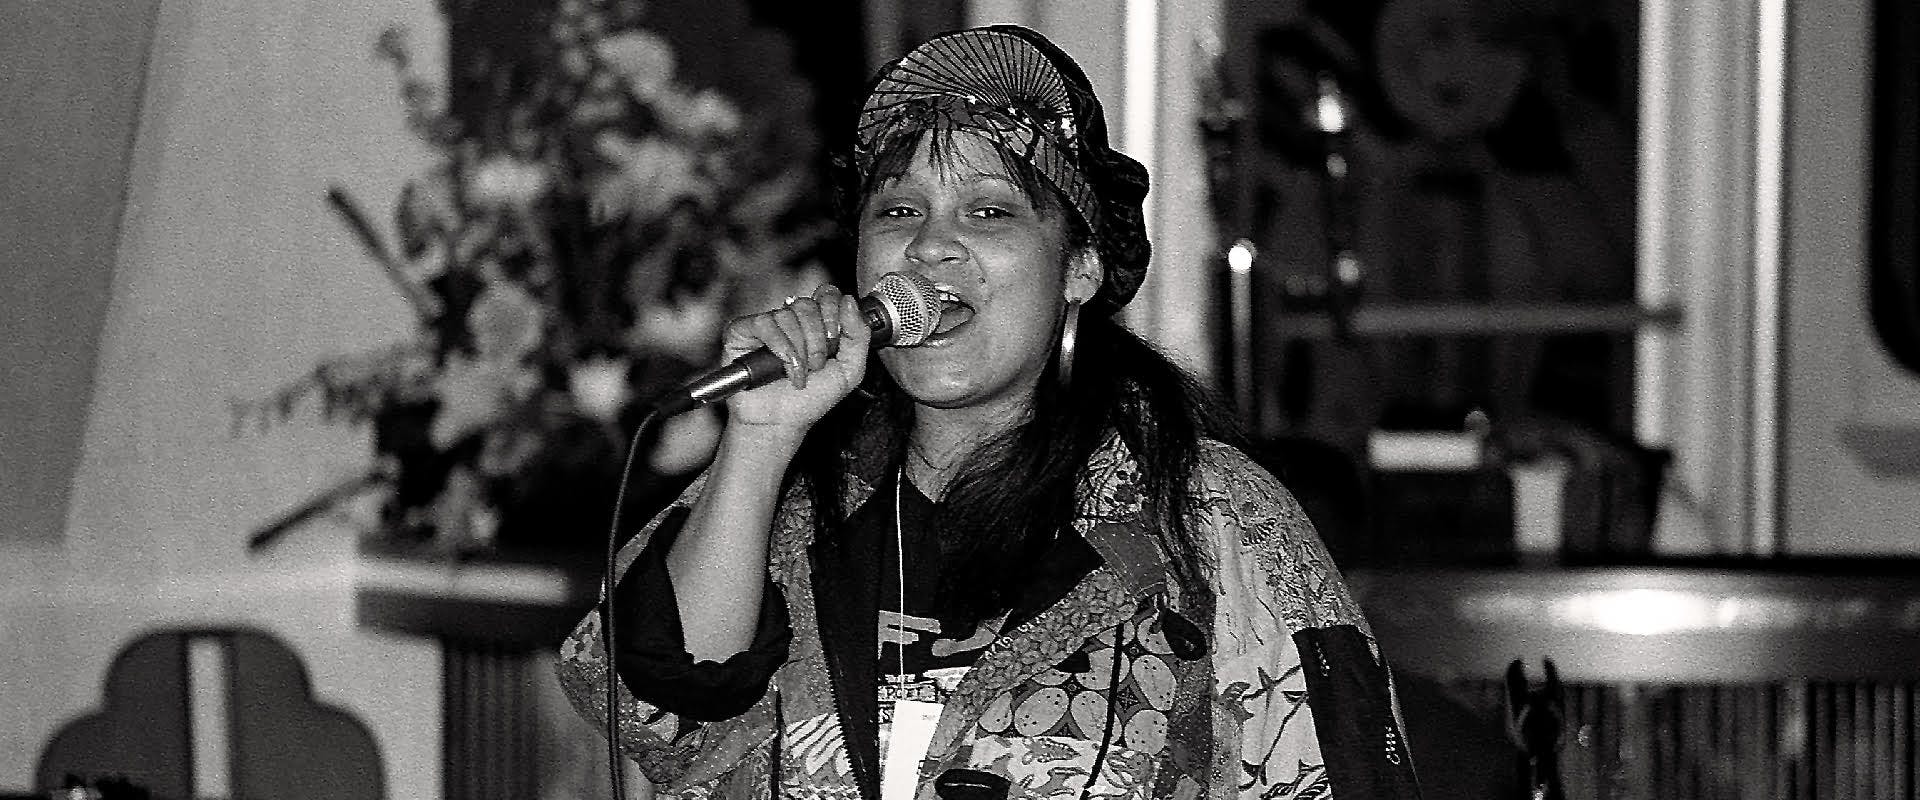 The Poetess performs during the Mid-Air Music Convention in Chicago, Illinois in June 1992.